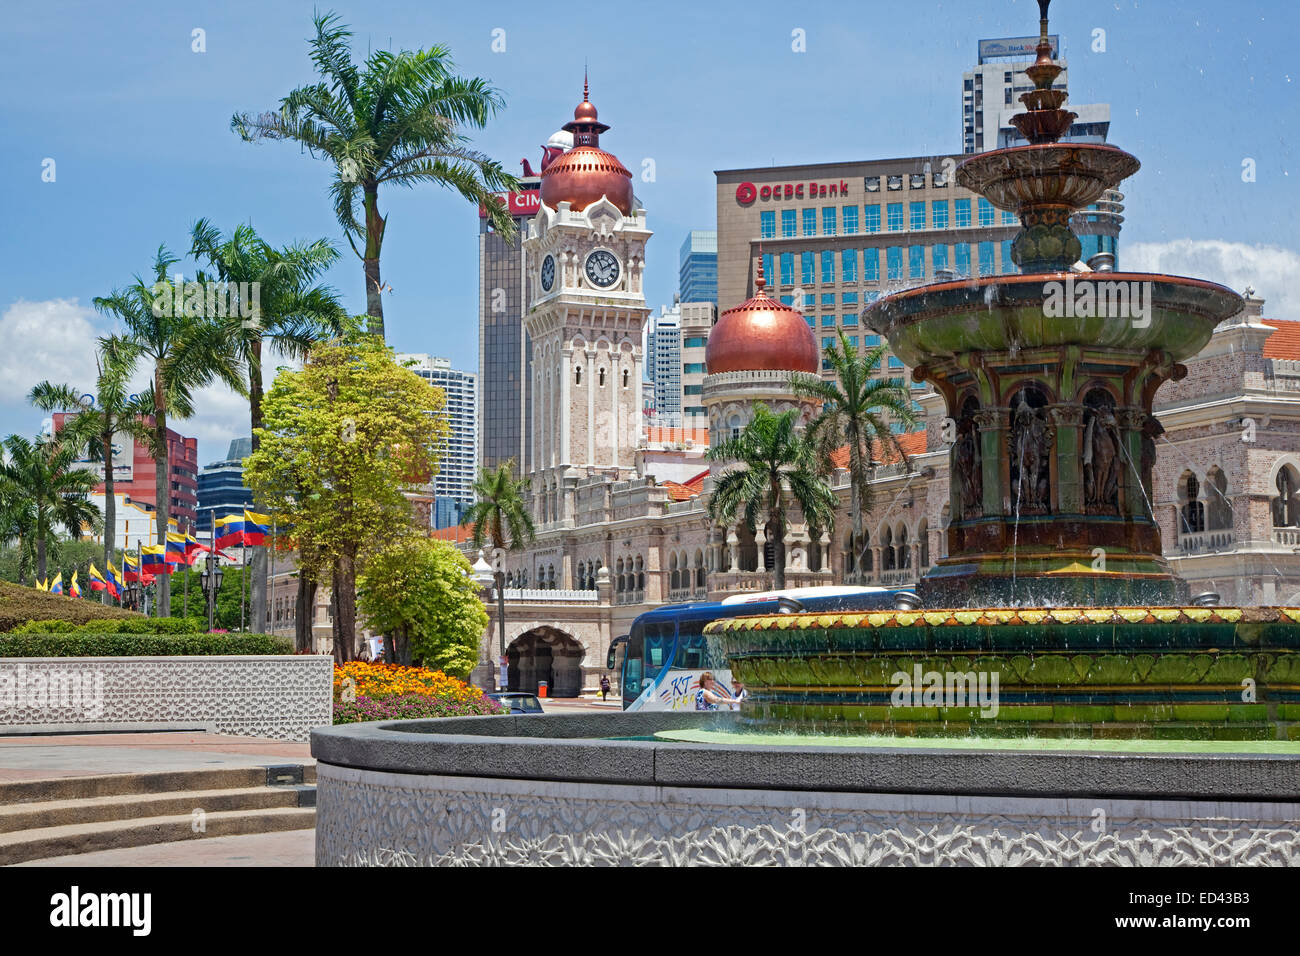 Merdeka Square showing fountain and the clock tower of the Sultan Abdul Samad Building in the city Kuala Lumpur, Malaysia Stock Photo